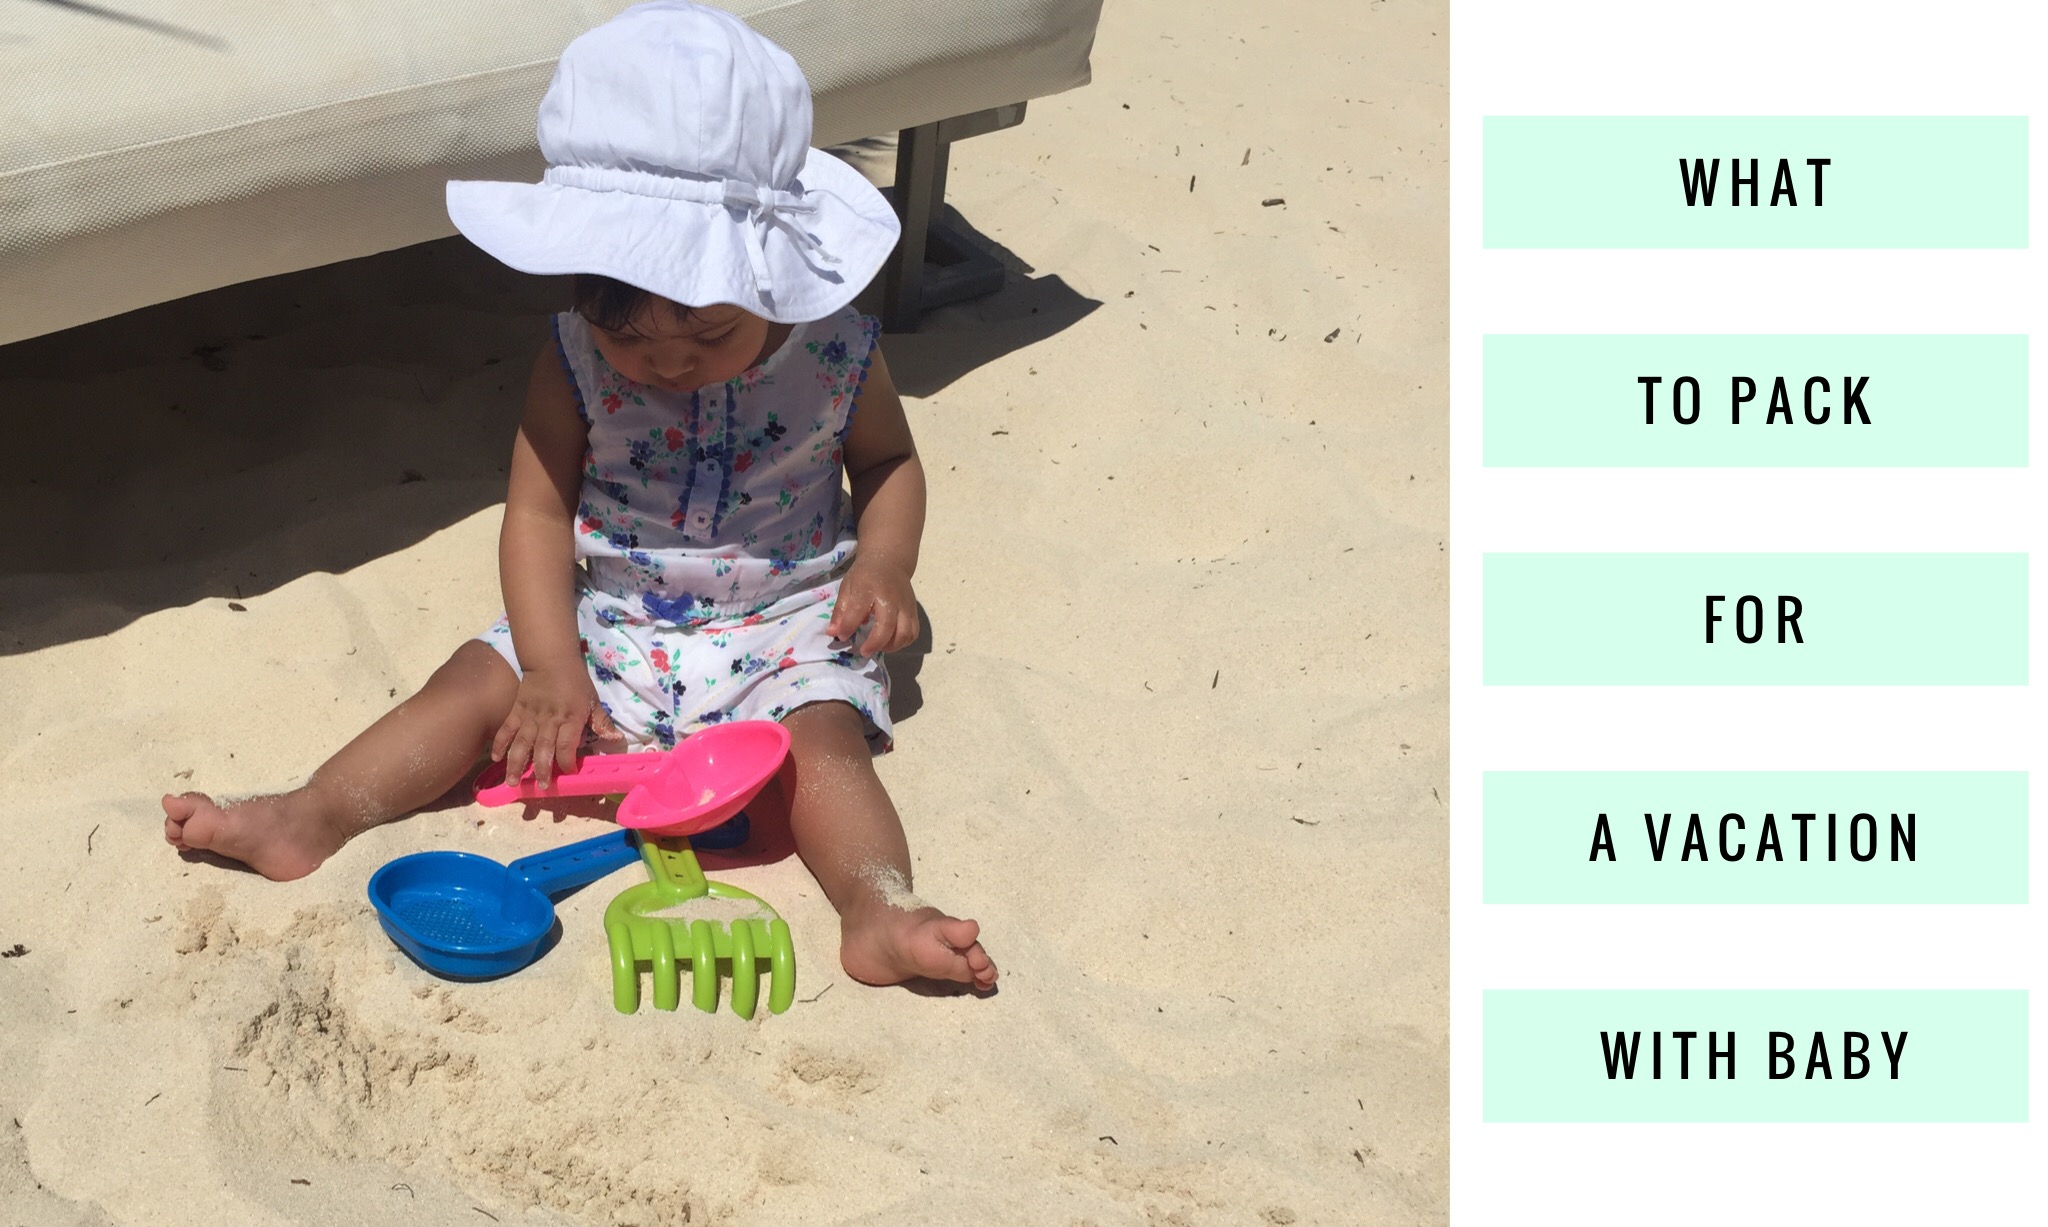 What to pack for a vacation with baby